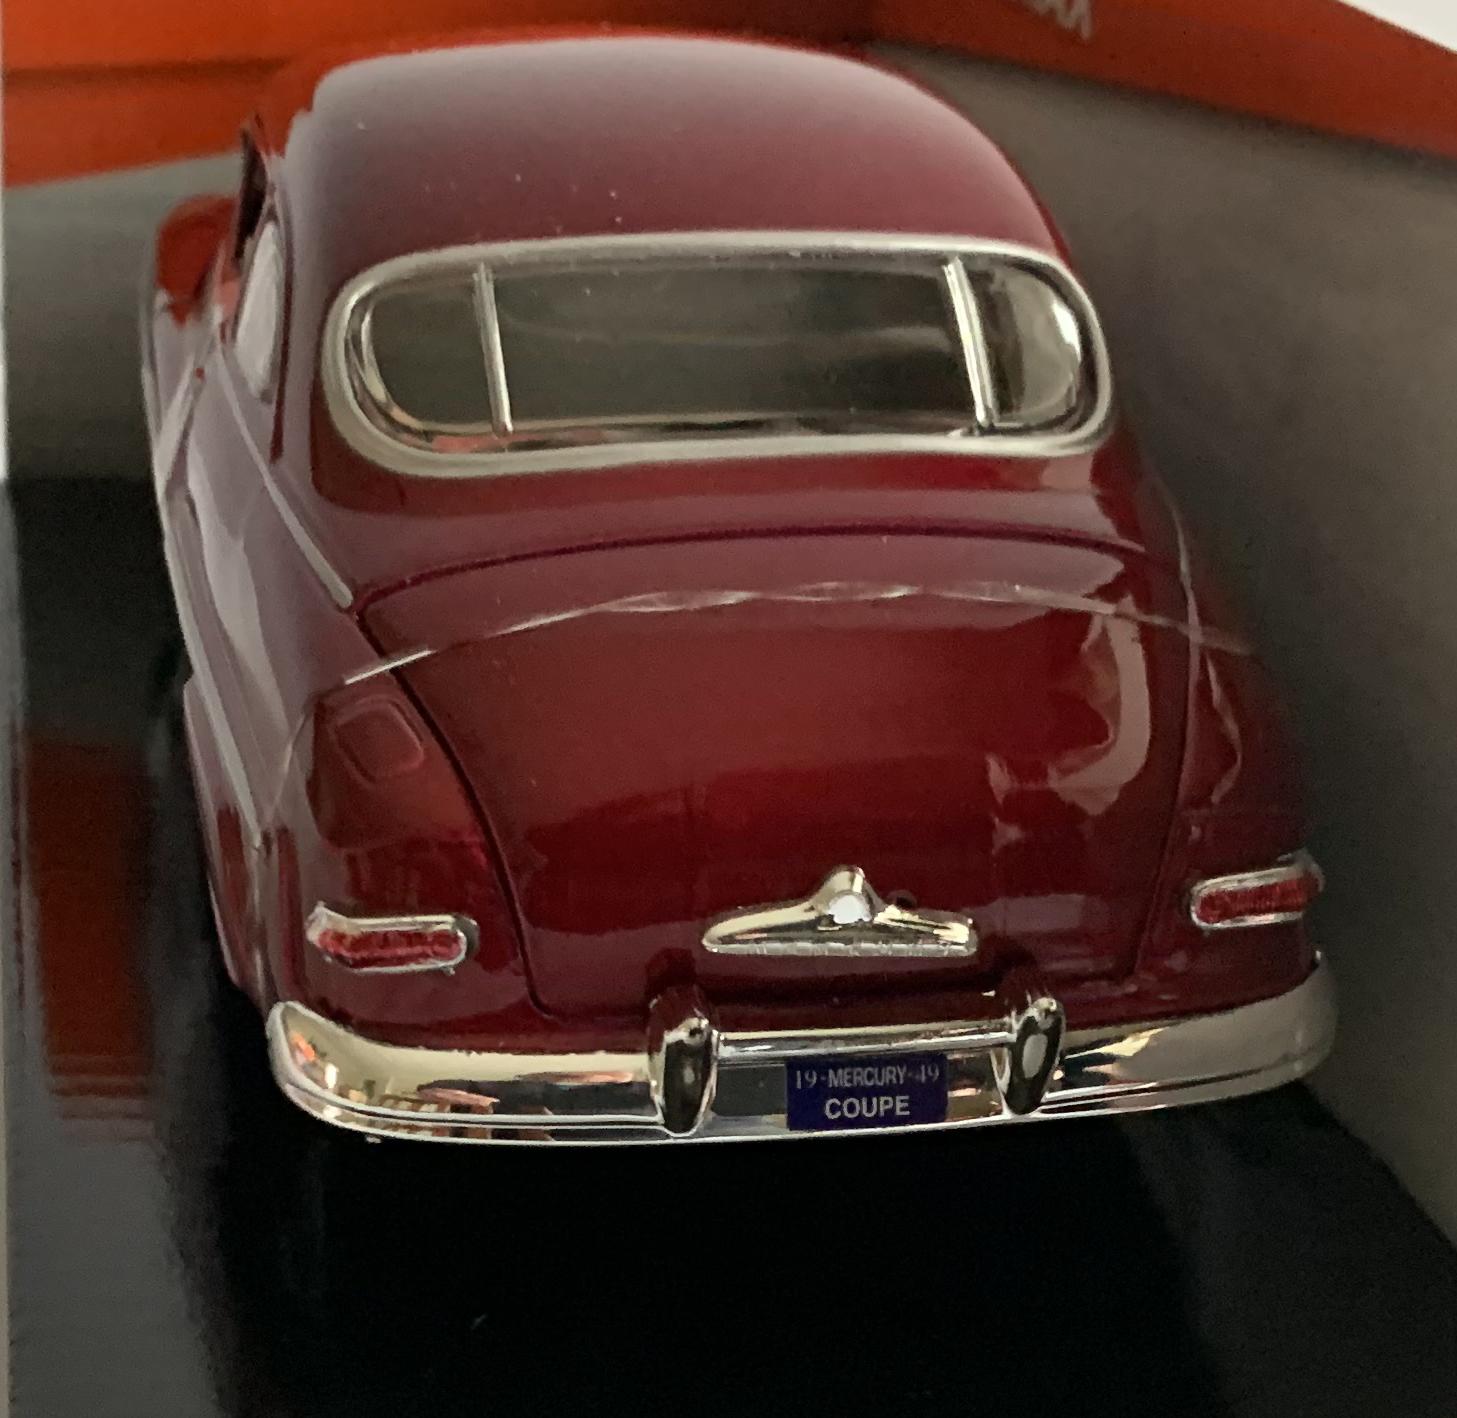 Motormax (Timeless Legends).1:24 scale diecast model of a Mercury coupe from 1949